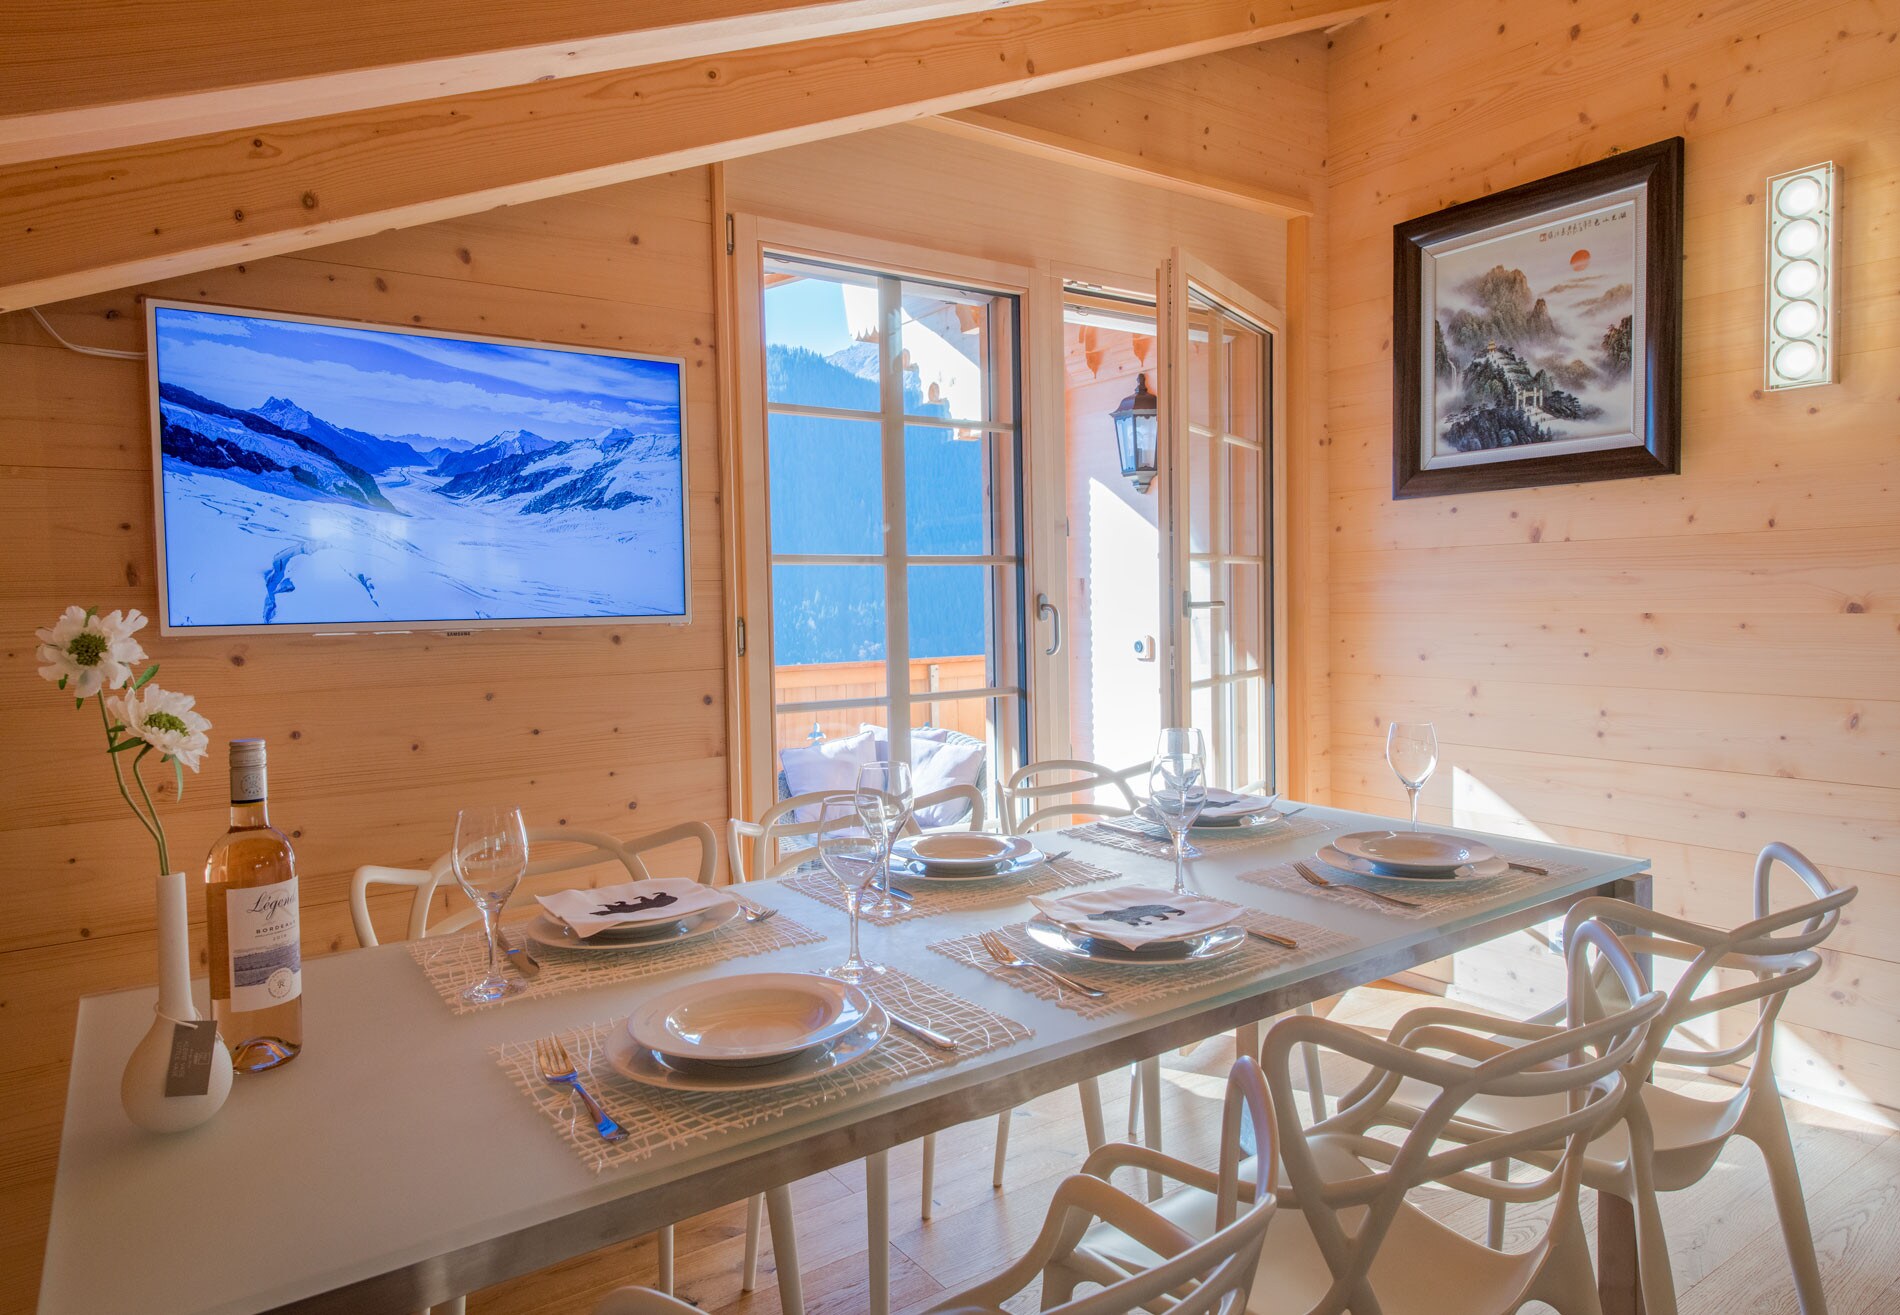 Dining room of the ski Chalet Aberot in Wengen.